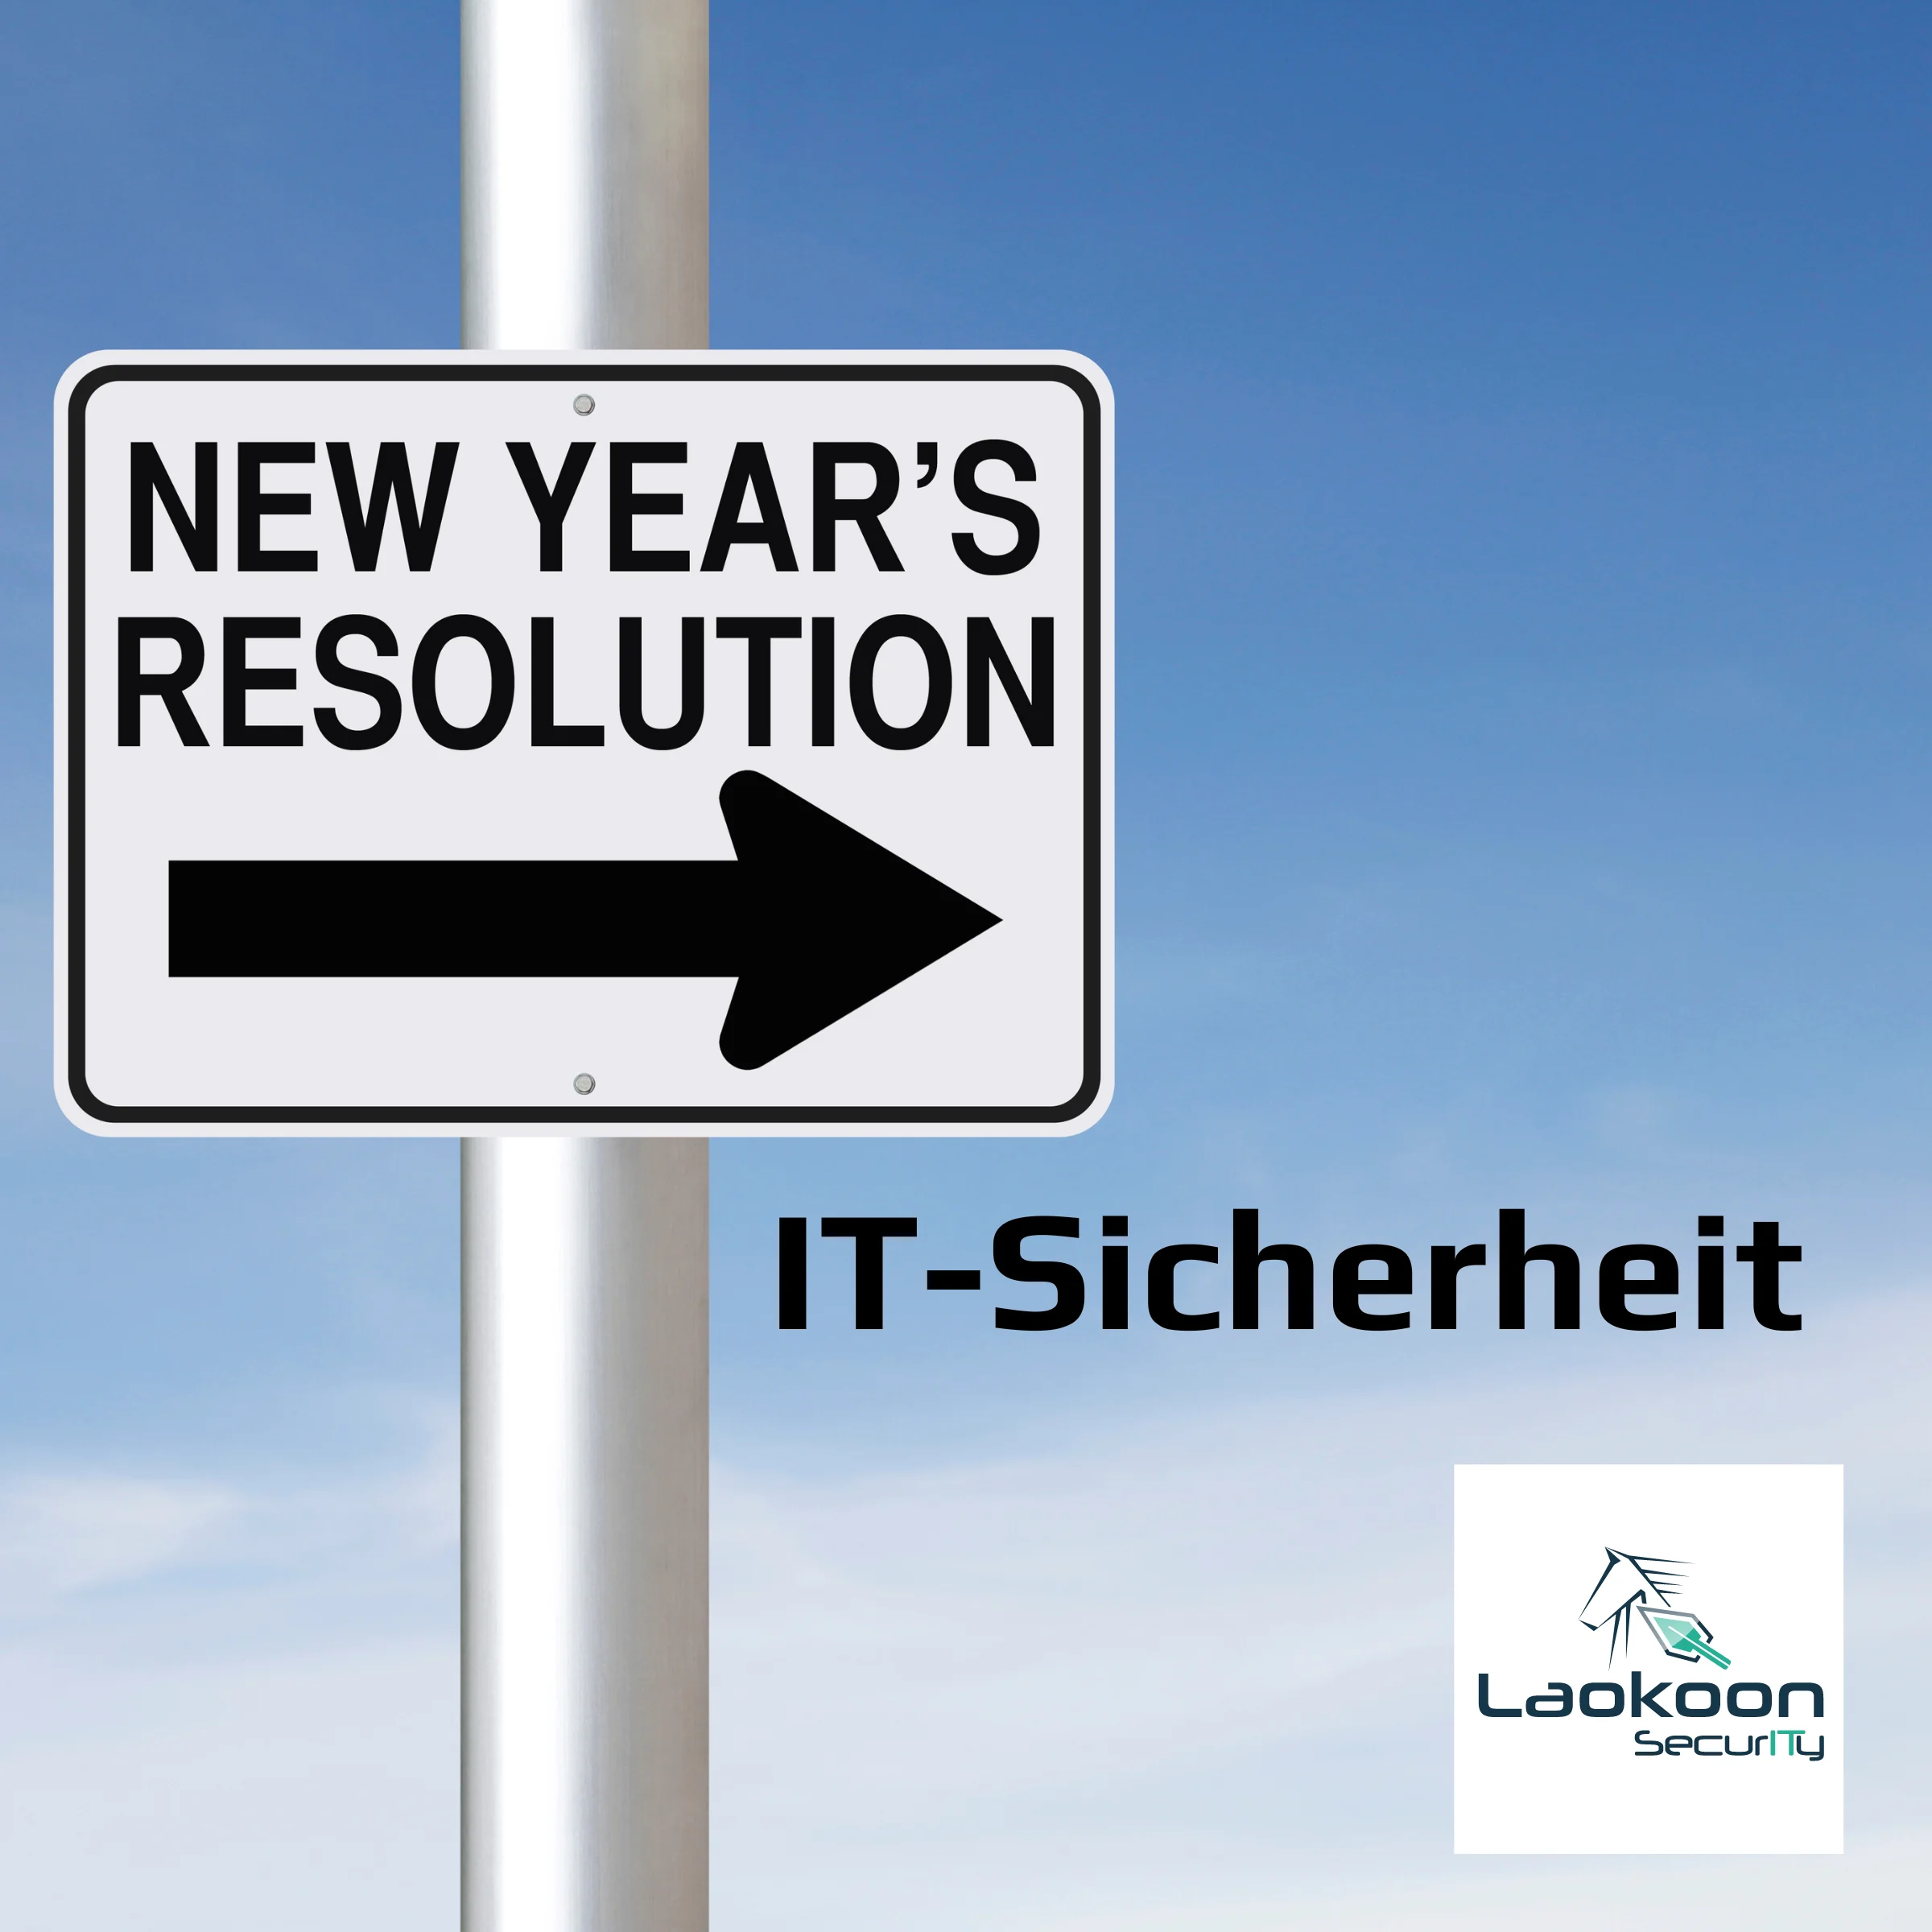 IT security as a New Year's resolution